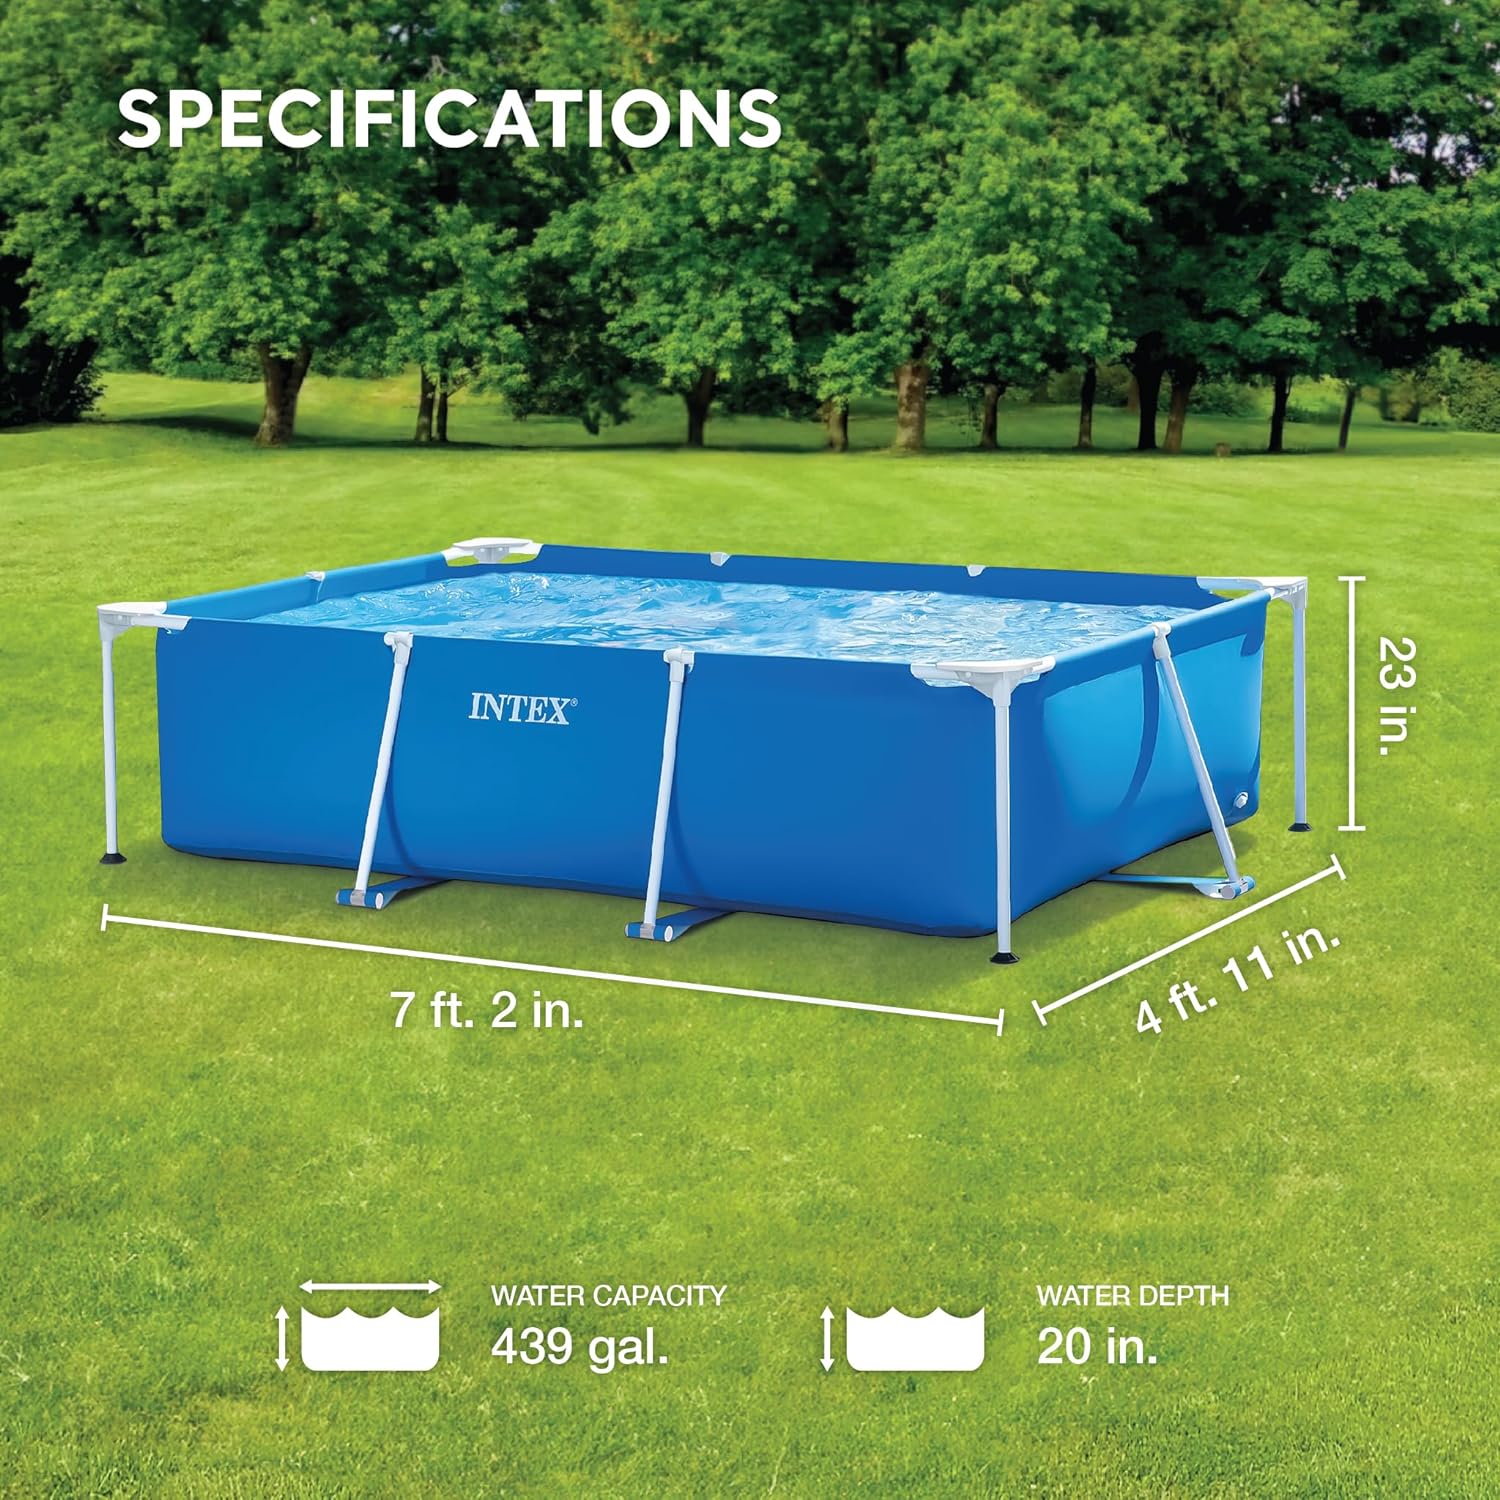 86" X 23" Rectangular Frame above Ground Outdoor Home Backyard Splash Swimming Pool with Flow Control Valve for Draining